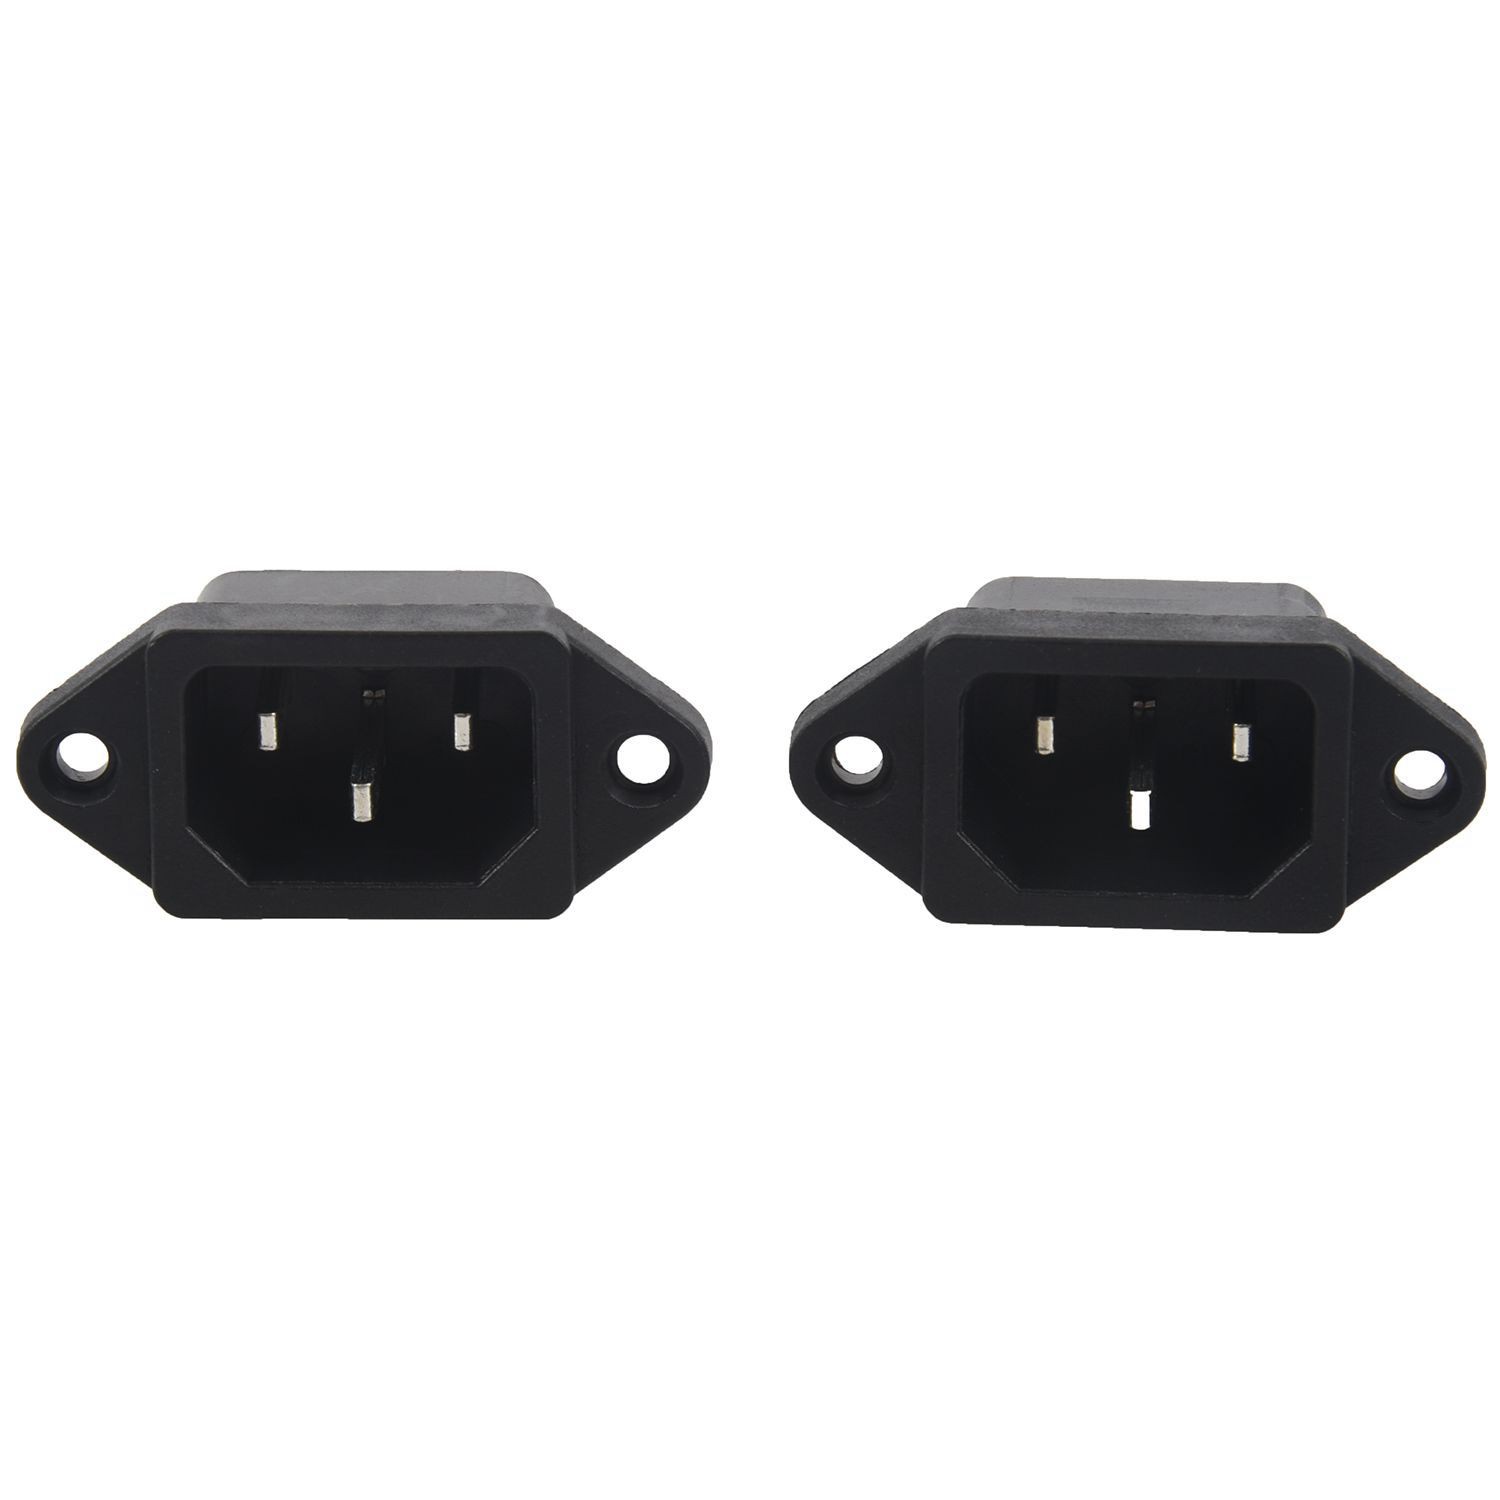 2x IEC 320 C14 Main Power 3Pin Male Plug PCB Socket Copper Connector Inlet Panel